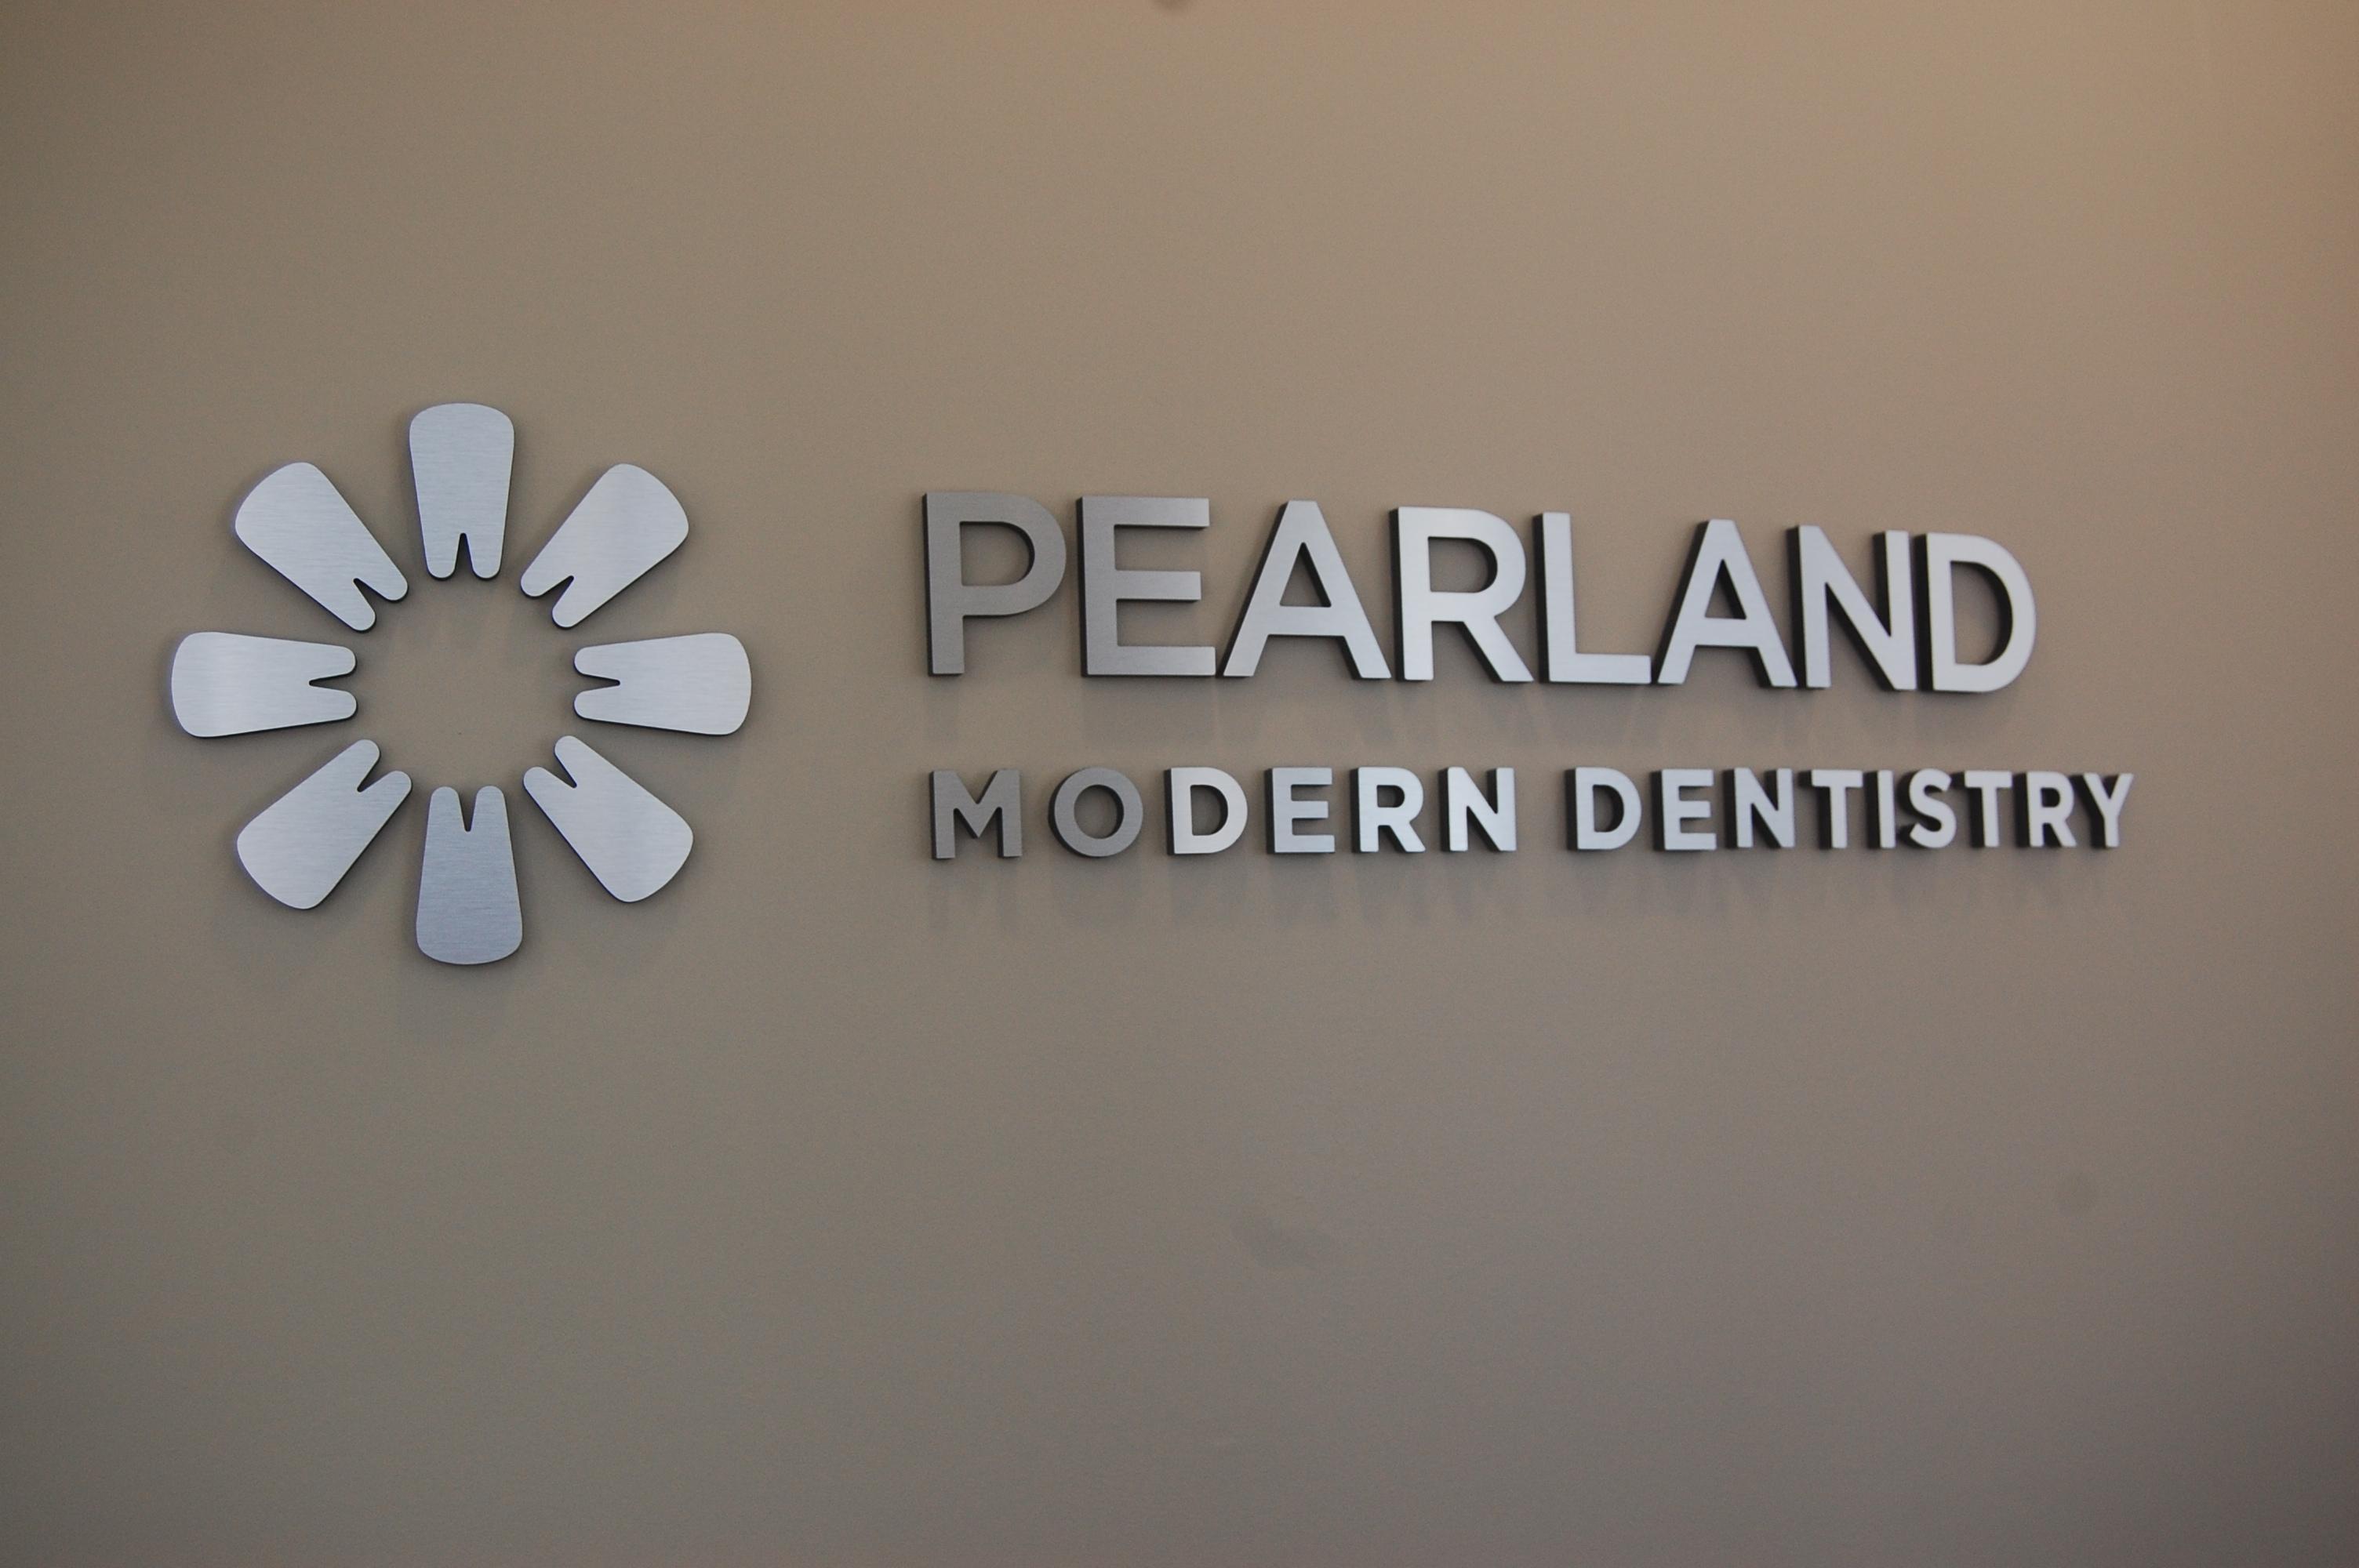 Pearland Modern Dentistry and Orthodontics opened its doors to the Pearland community in June 2012.